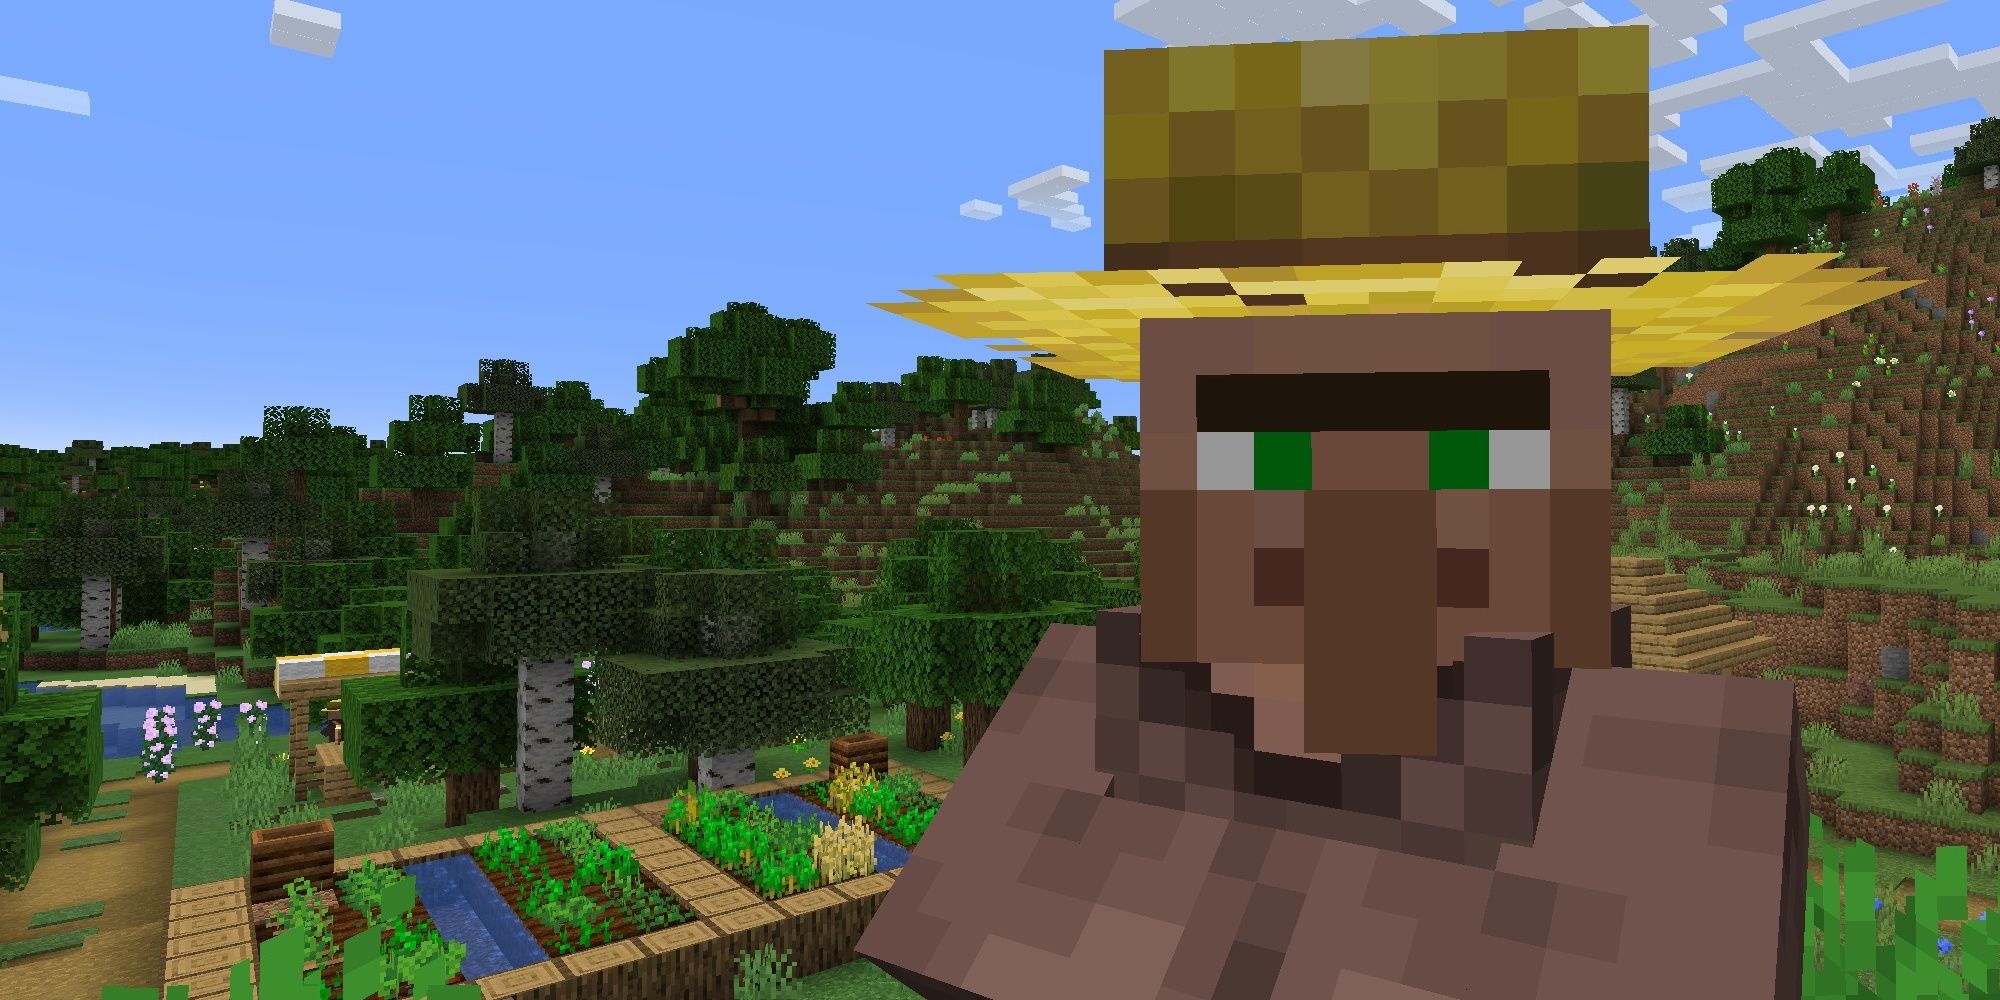 Minecraft Villager in front of Farm